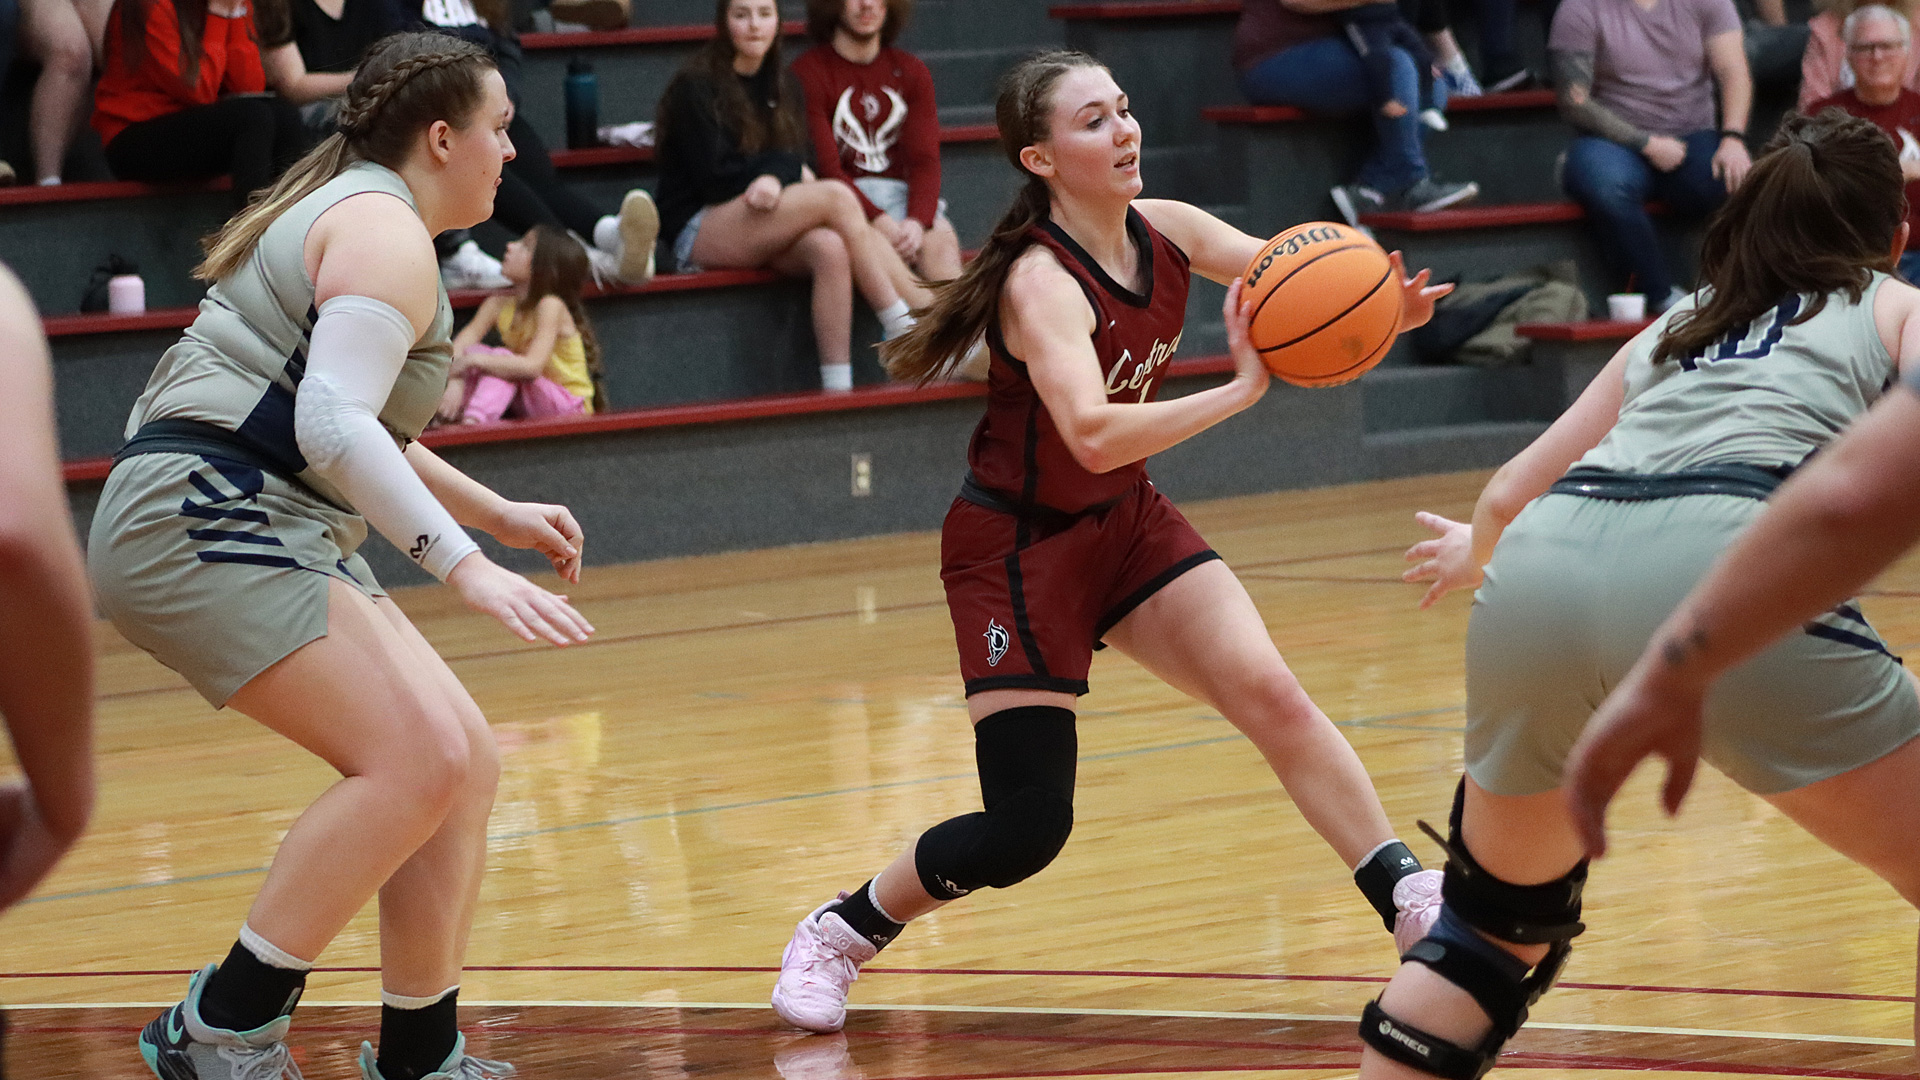 CCCB freshman Kelsey Todd scored 40 points in two games over the weekend as the Saints lost to Faith Baptist on Friday and defeated Emmaus Bible on Saturday.